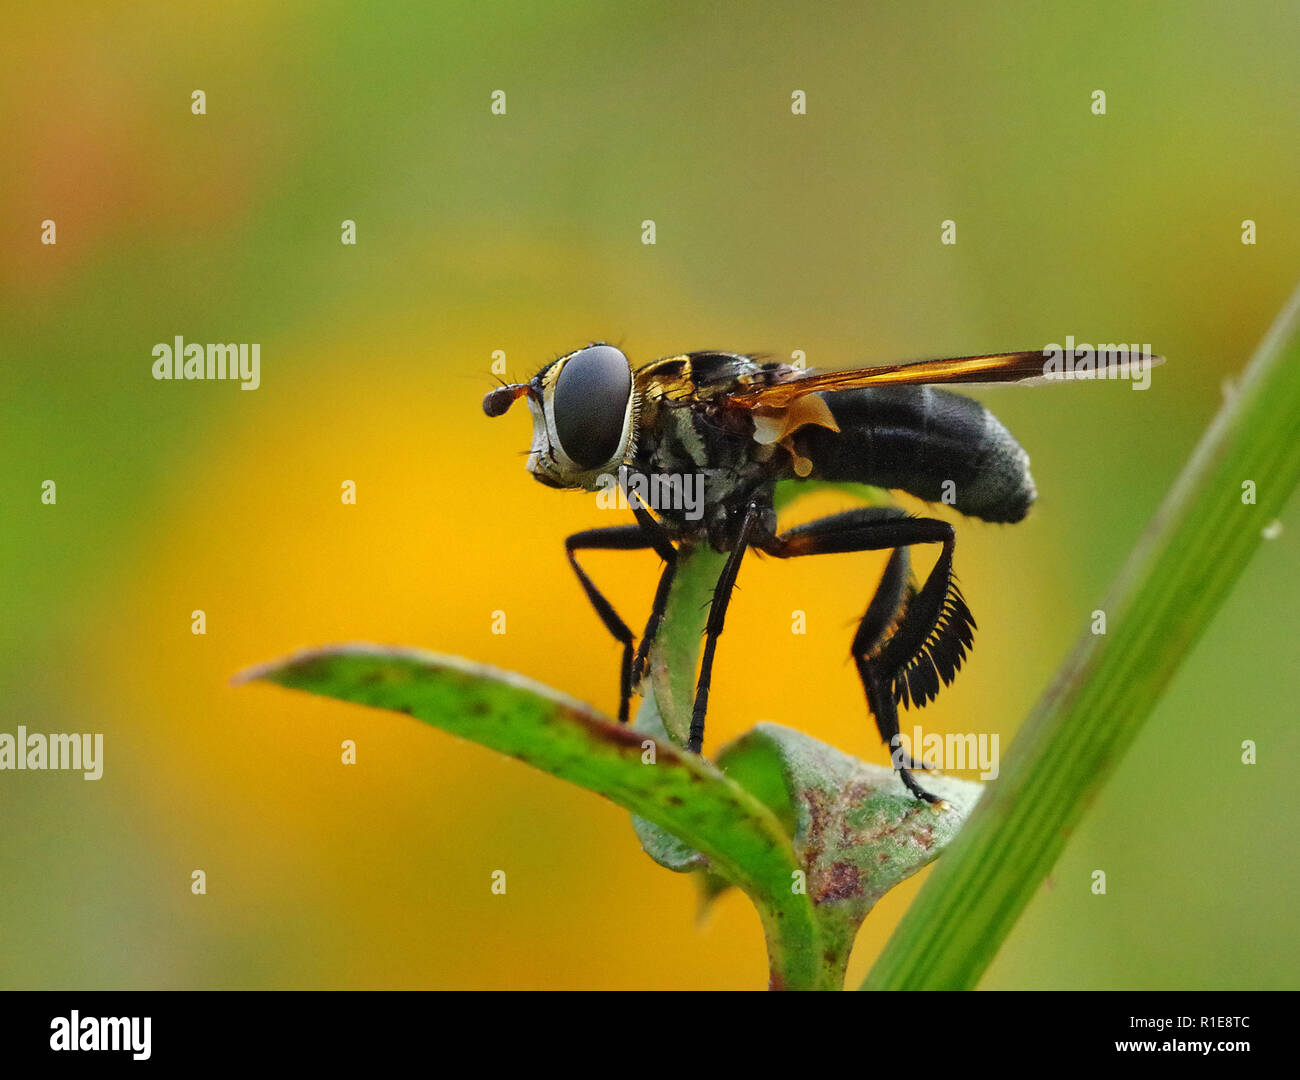 Feather-legged fly Trichopoda pennipes, a parasite of stink bugs used for biological controls Stock Photo